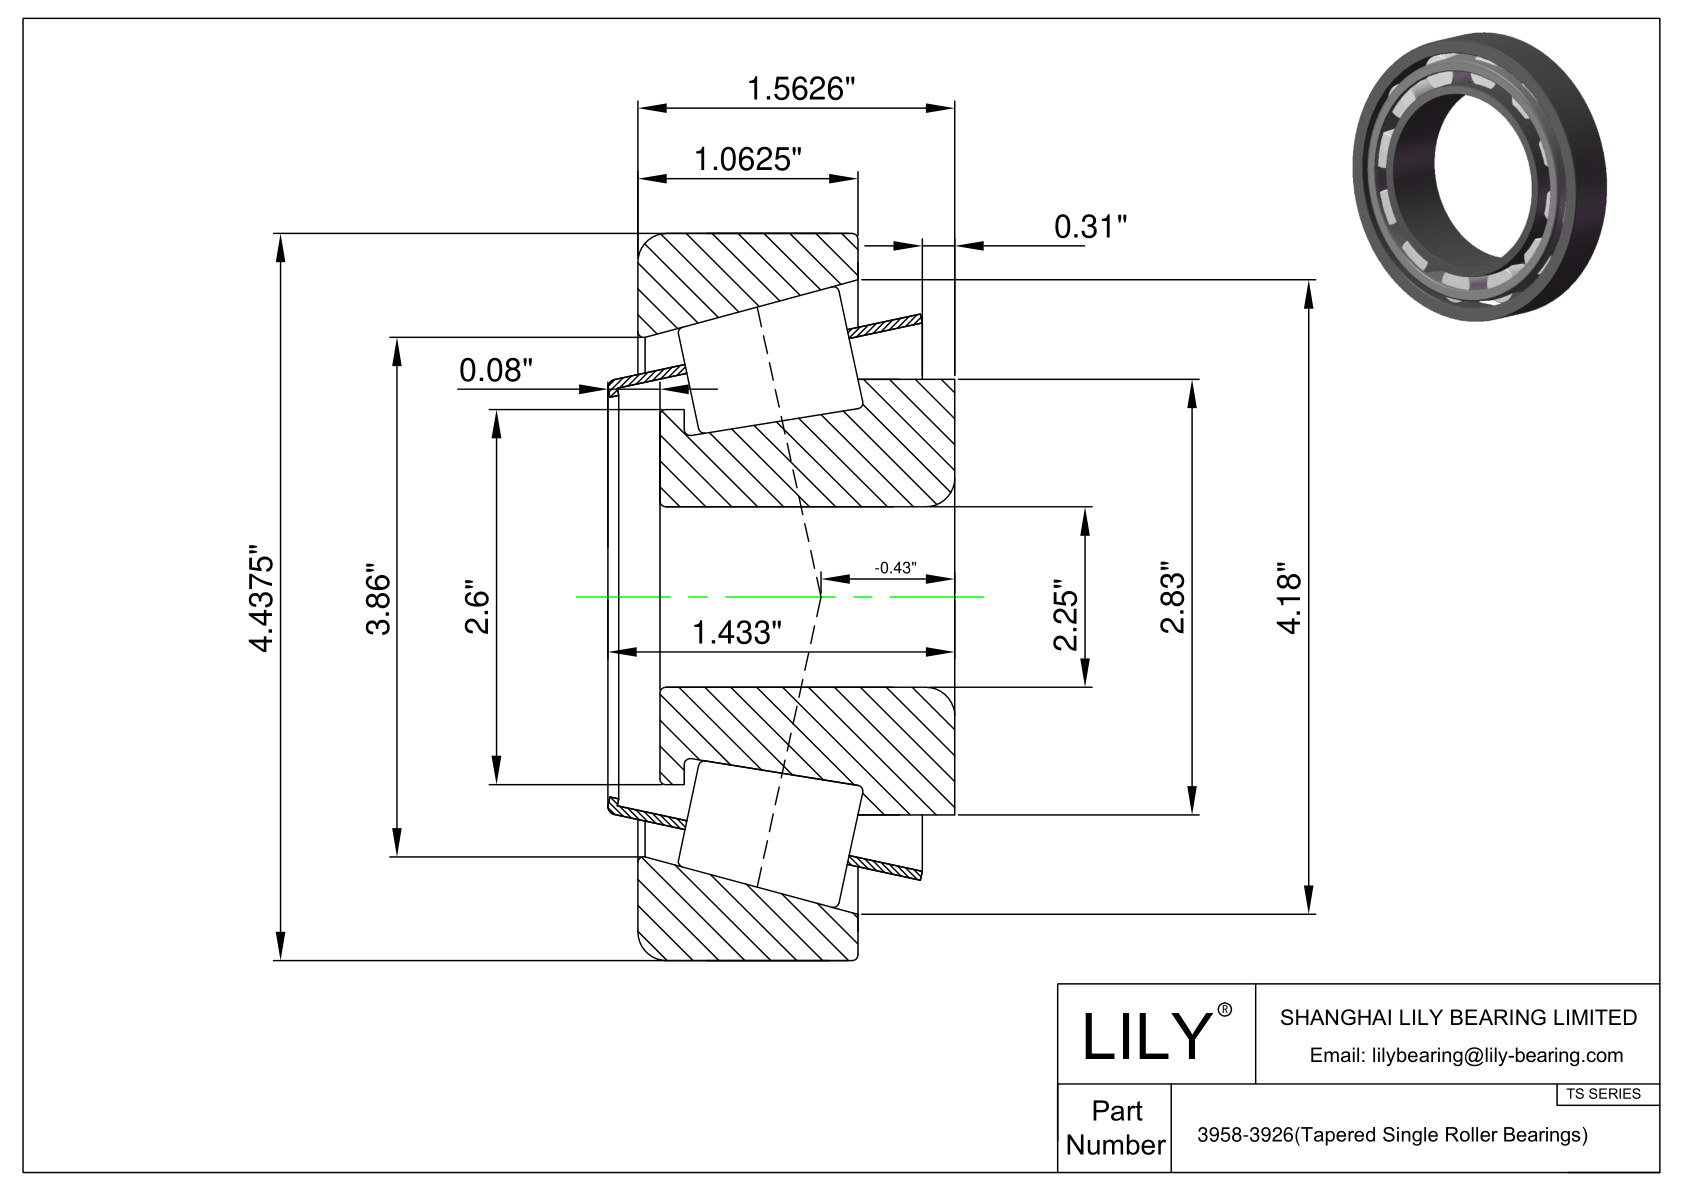 3958-3926 TS (Tapered Single Roller Bearings) (Imperial) cad drawing